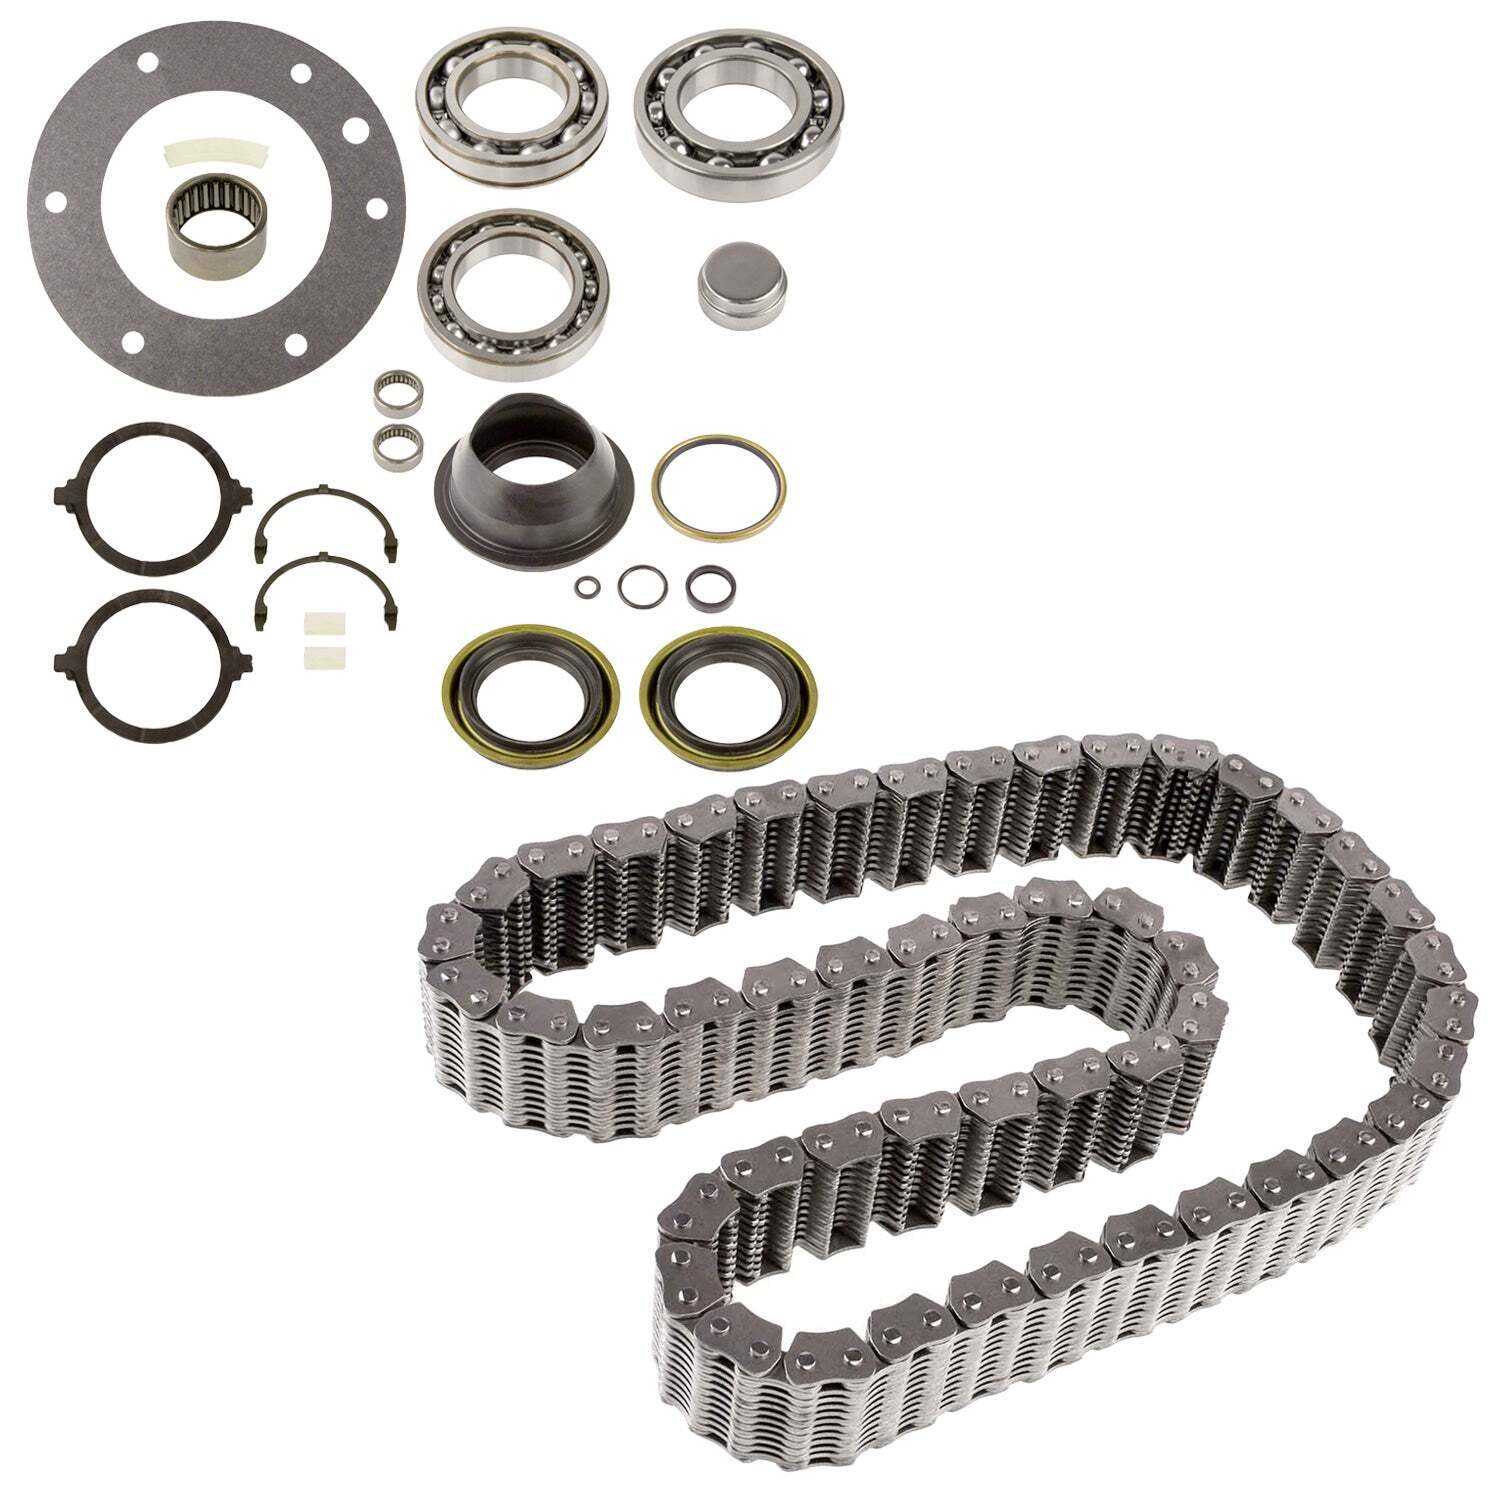 Dodge NP273D Transfer Case Rebuild Kit w/ Bearings Gaskets Seals and Borg Chain